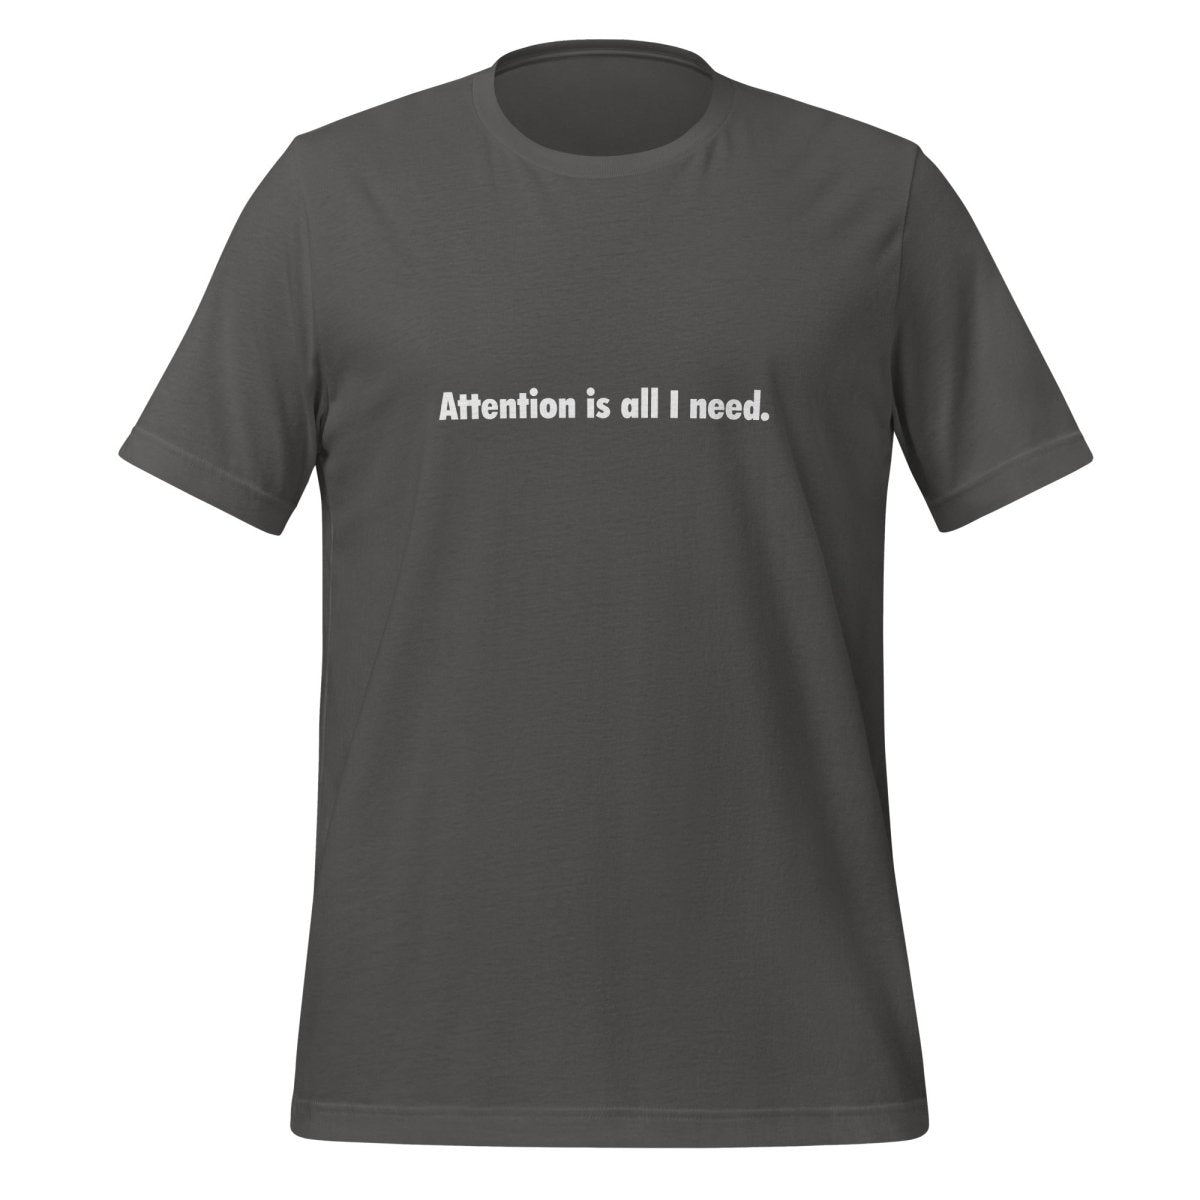 Attention is all I need. T - Shirt (unisex) - Asphalt - AI Store